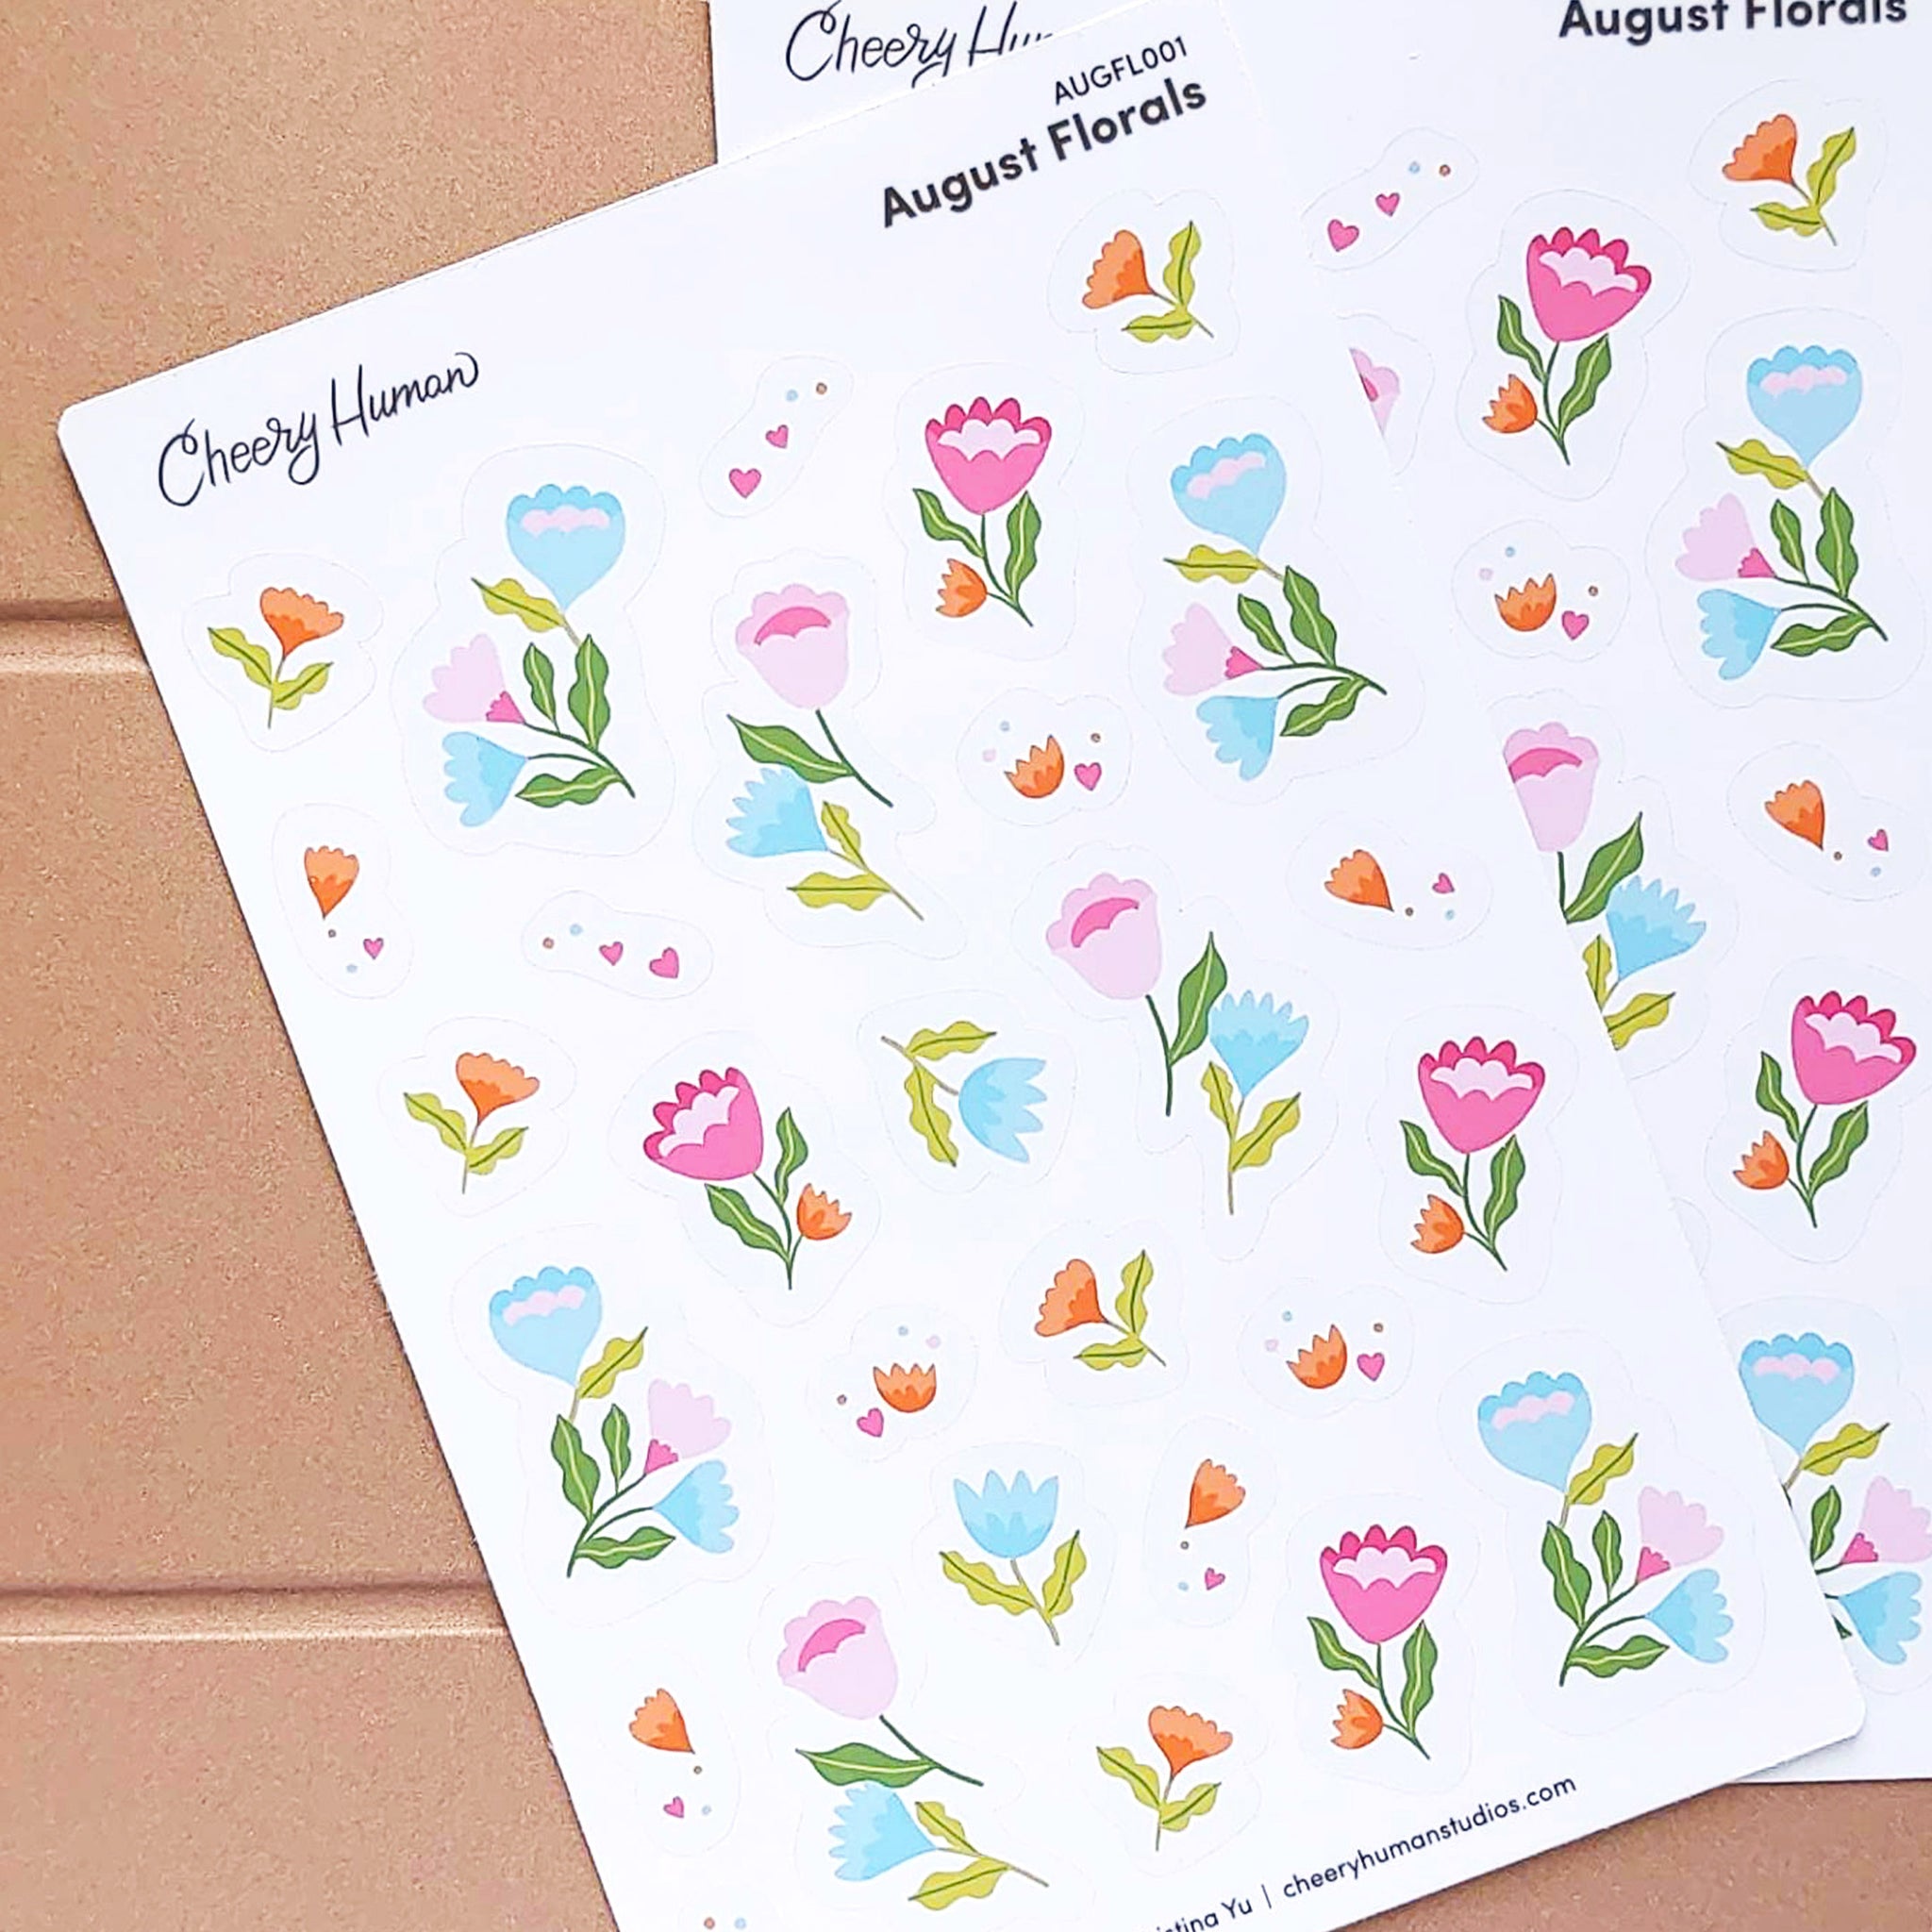 August Florals | Single Sticker Sheet or Pack of 5